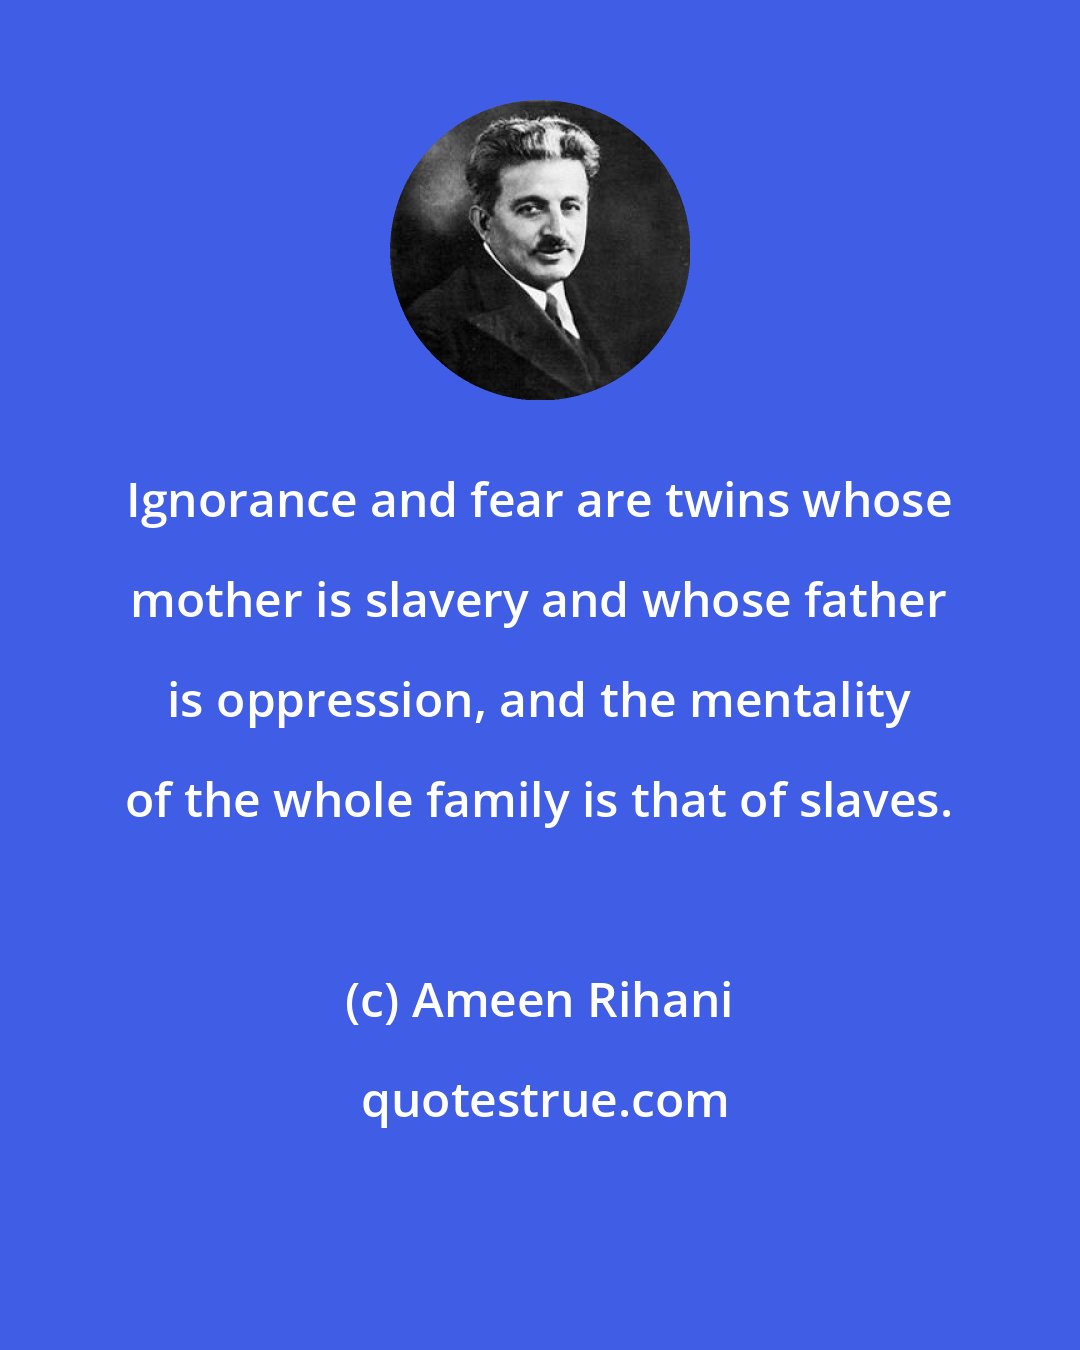 Ameen Rihani: Ignorance and fear are twins whose mother is slavery and whose father is oppression, and the mentality of the whole family is that of slaves.